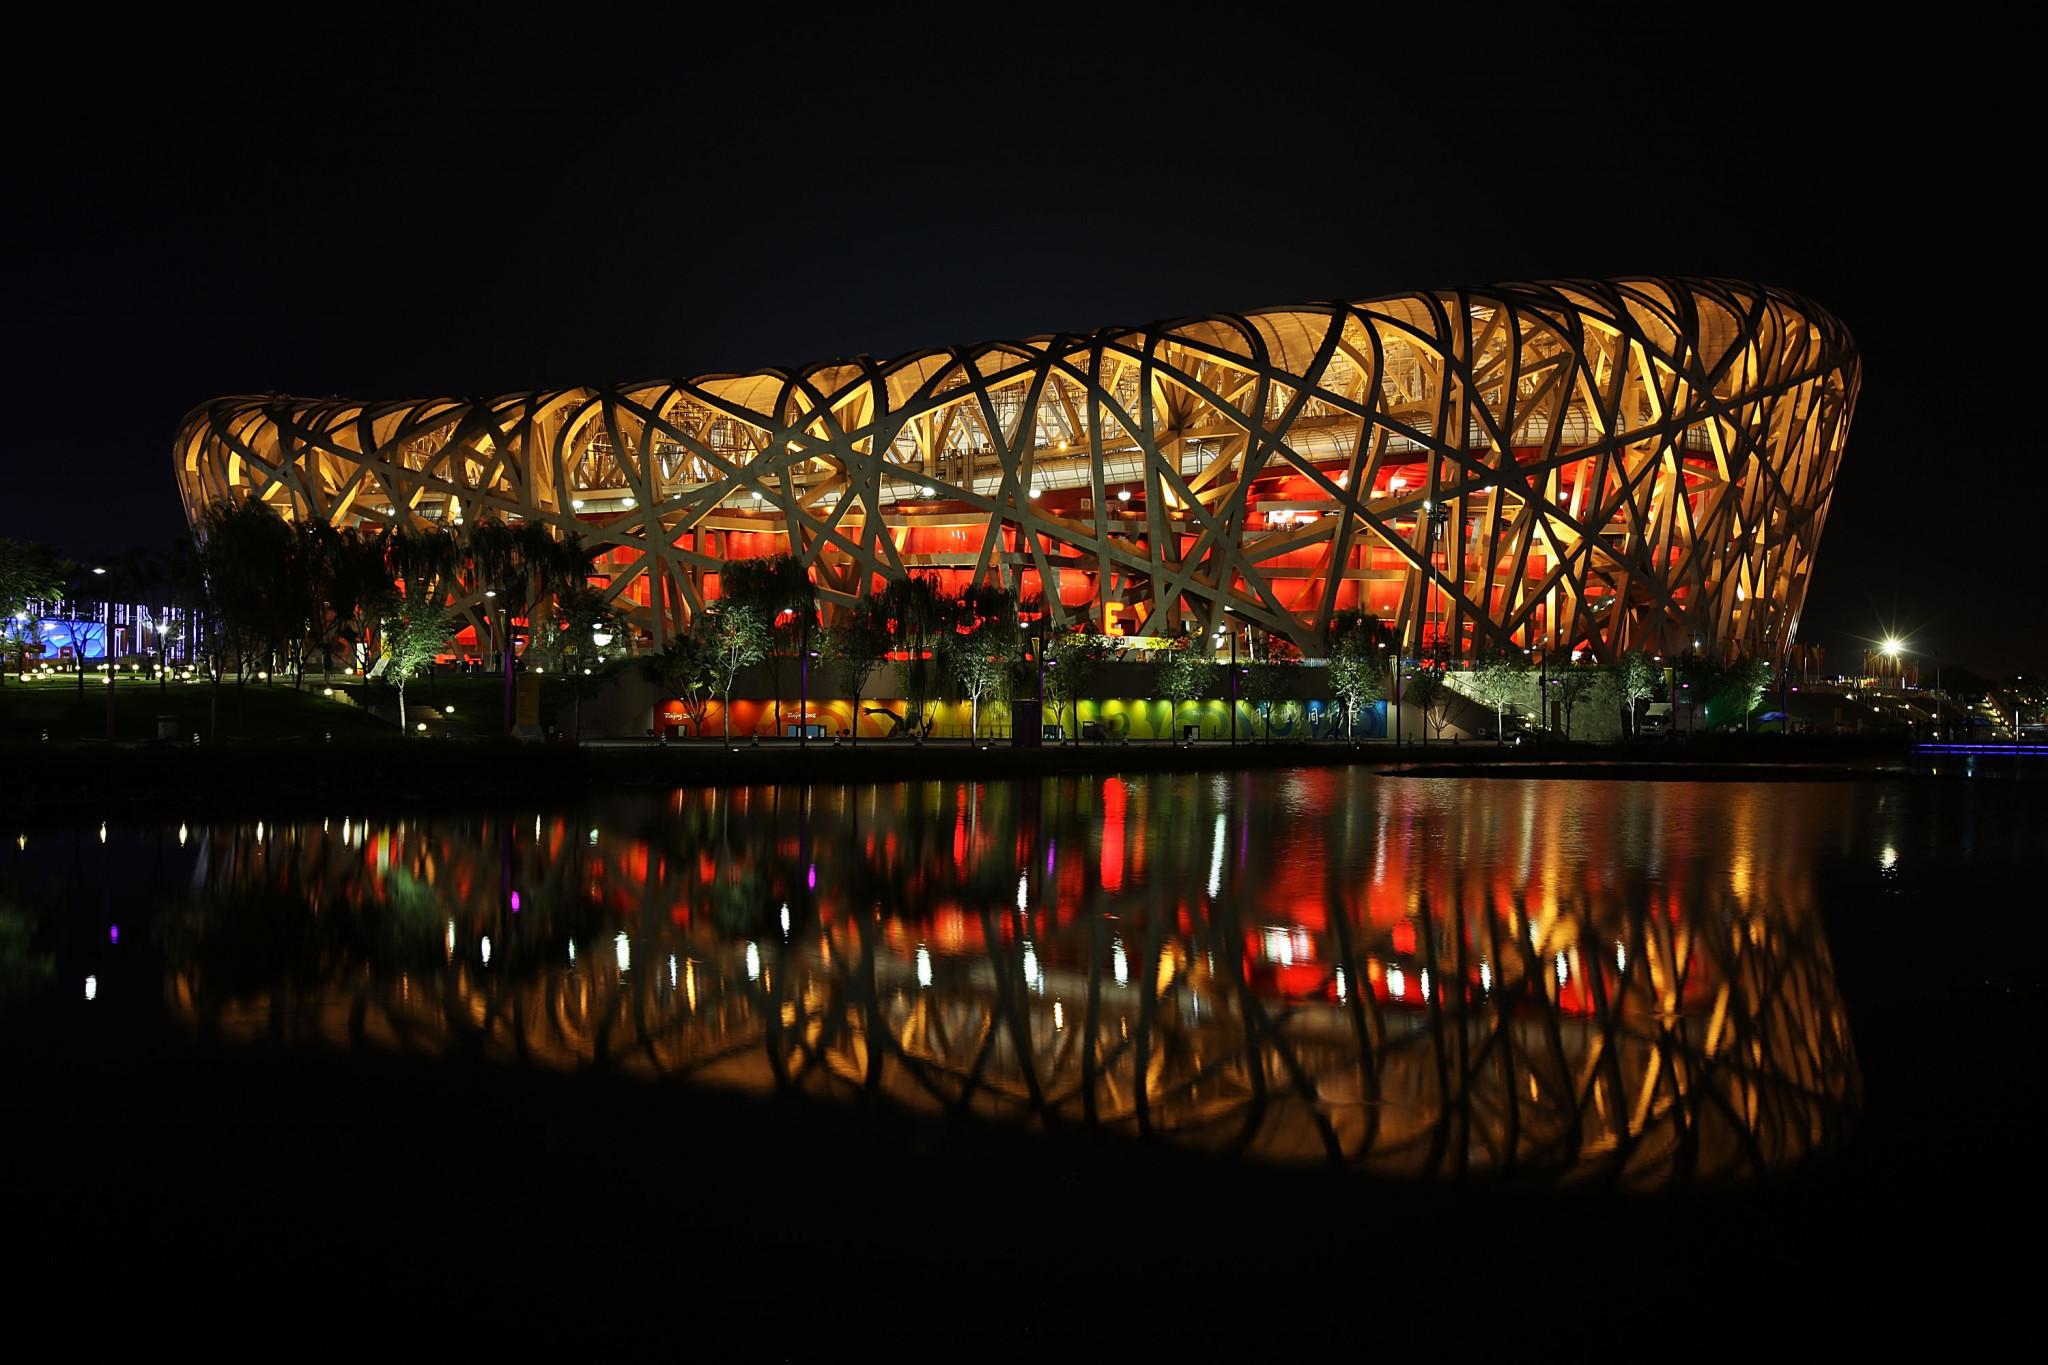 Beijing 2022 is set to begin with the Opening Ceremony from the Beijing National Stadium on February 4 ©Getty Images